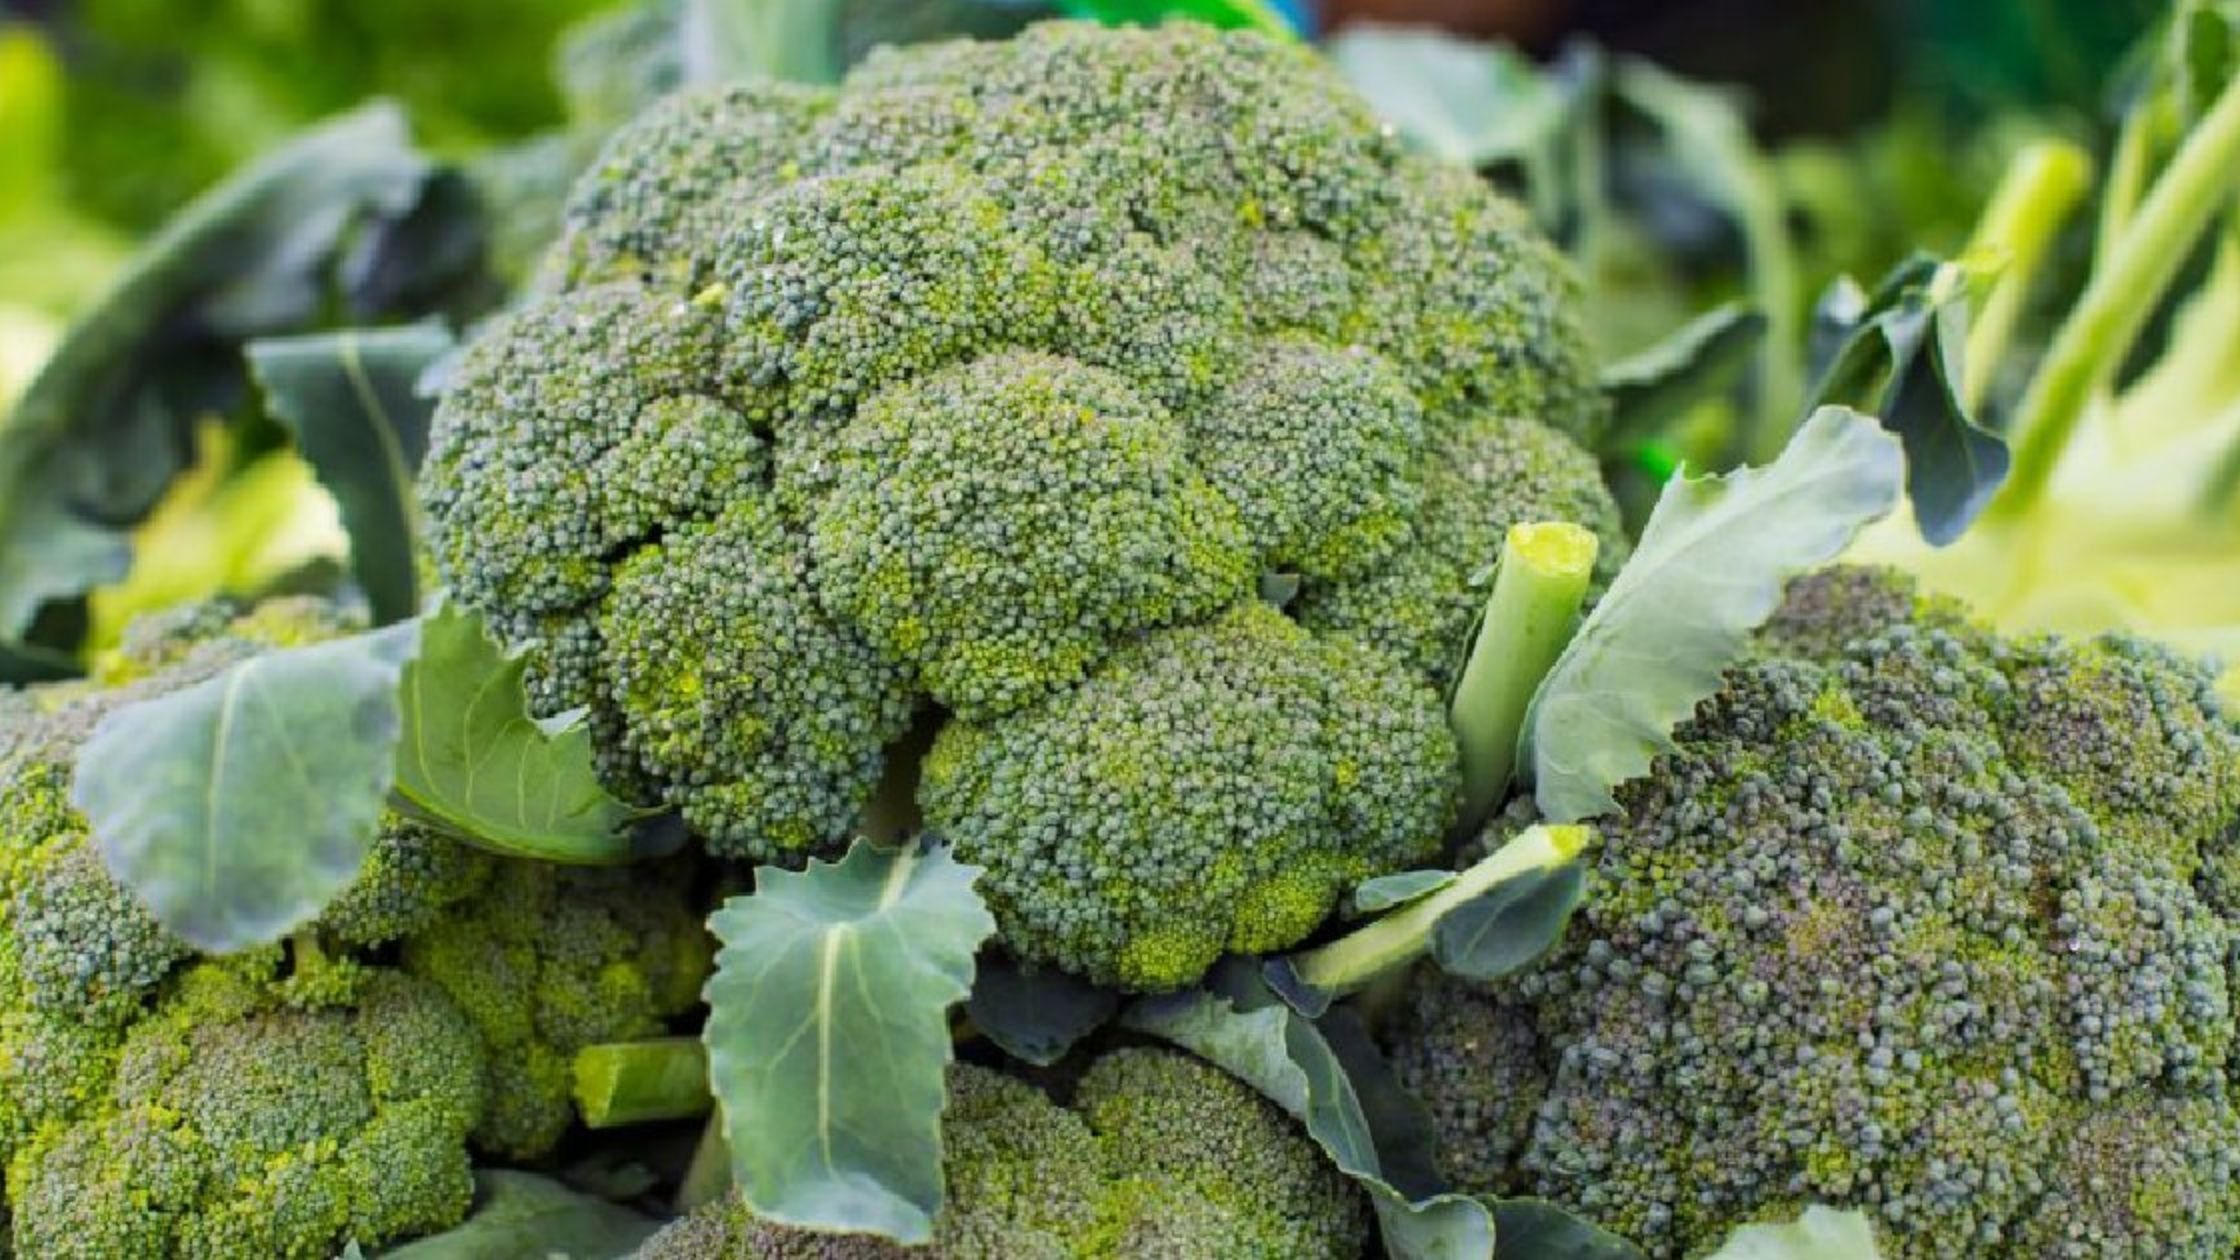 The income of the farmers of Bihar is increasing due to the cultivation of broccoli